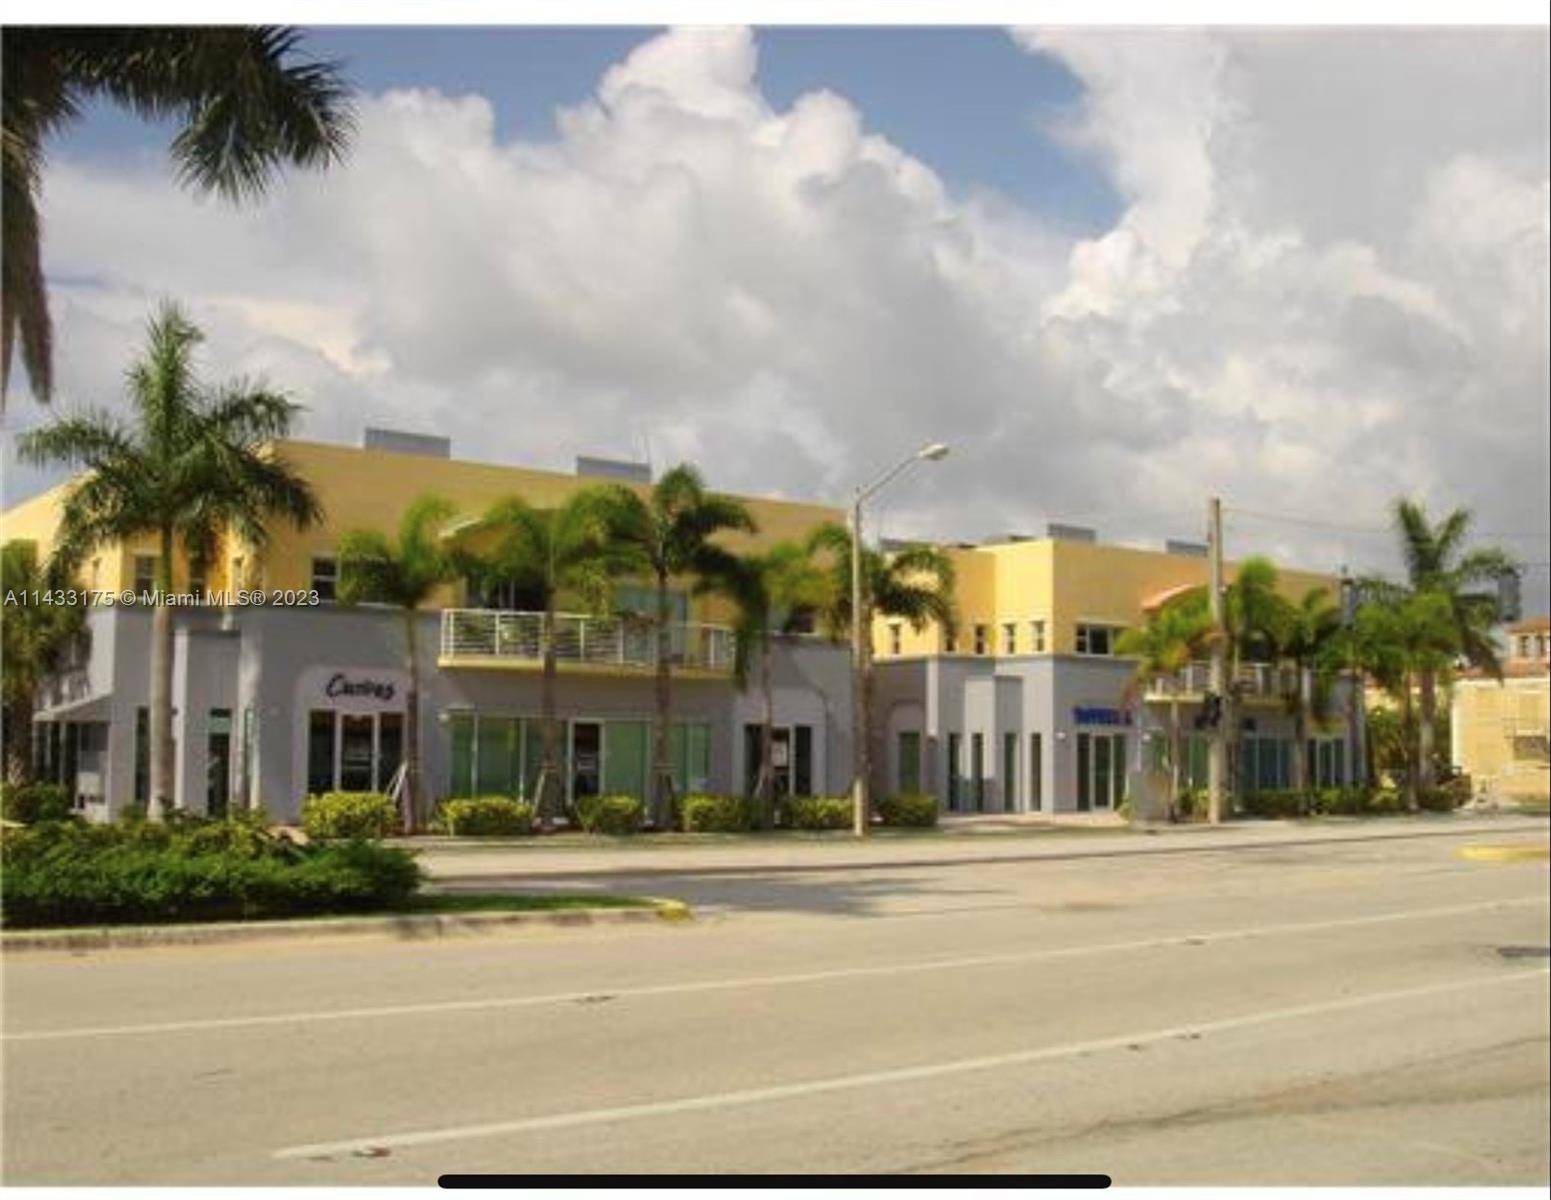 Prime location ! ! Property has a great frontage on E Dania Blvd.